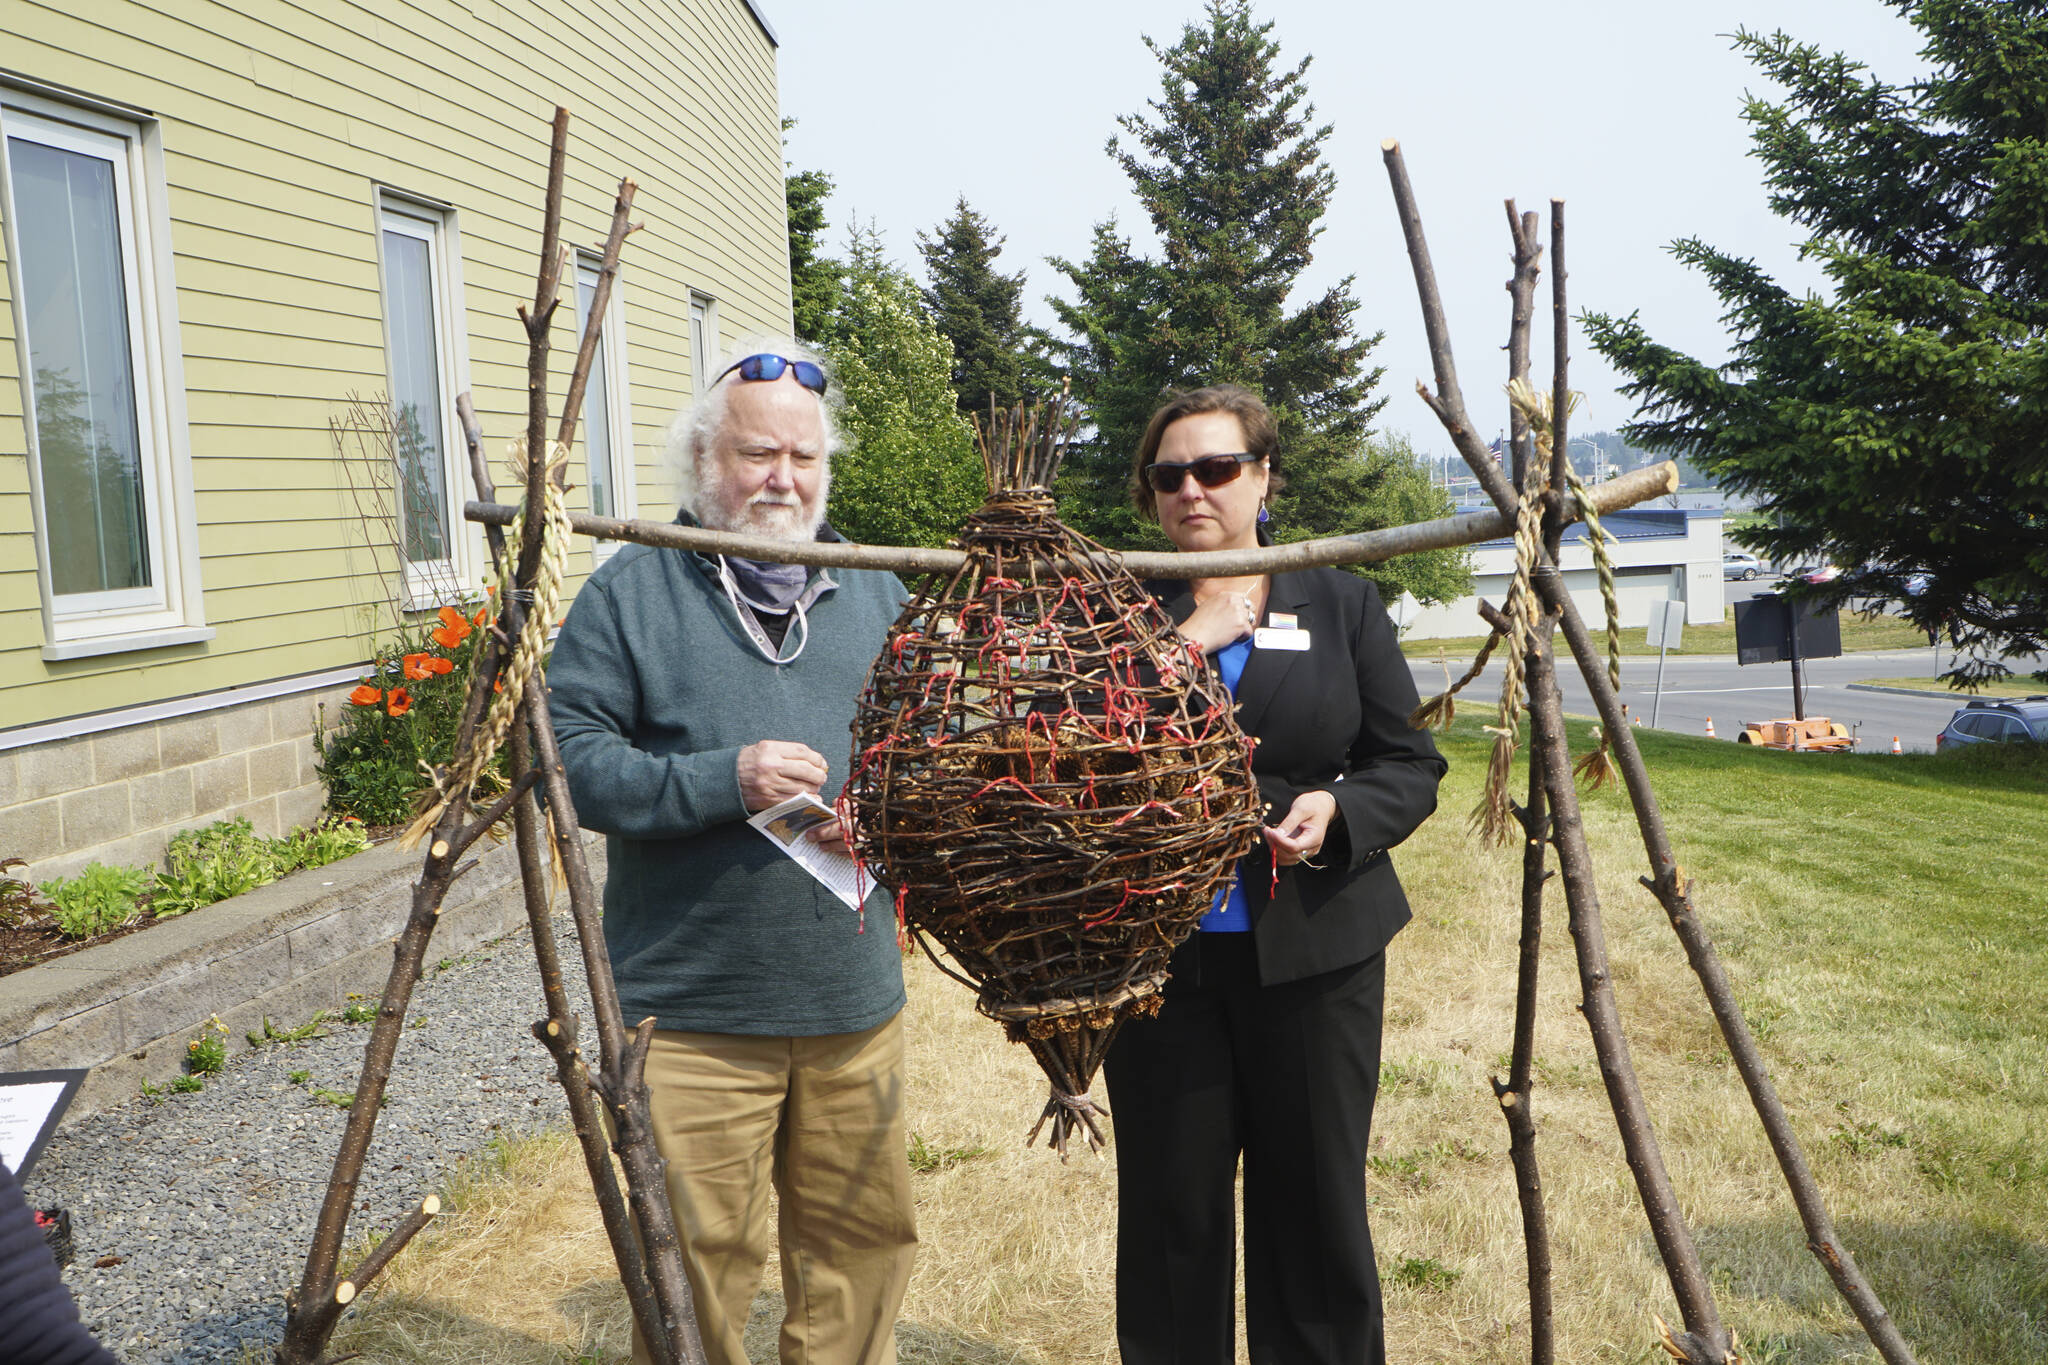 Pastor Lisa Talbott, right, of Homer United Methodist Church, and Joseph Talbott, left, place spruce cones in rememberance of Anesha “Duffy” in the Sphere of Love, a sculpture by Mavis Muller. Pastor Talbott delivered a prayer at the dedication of the Loved & Lost Memorial Bench on Sunday, June 12, 2022, at the Homer Public Library in Homer, Alaska. (Photo by Michael Armstrong/Homer News)